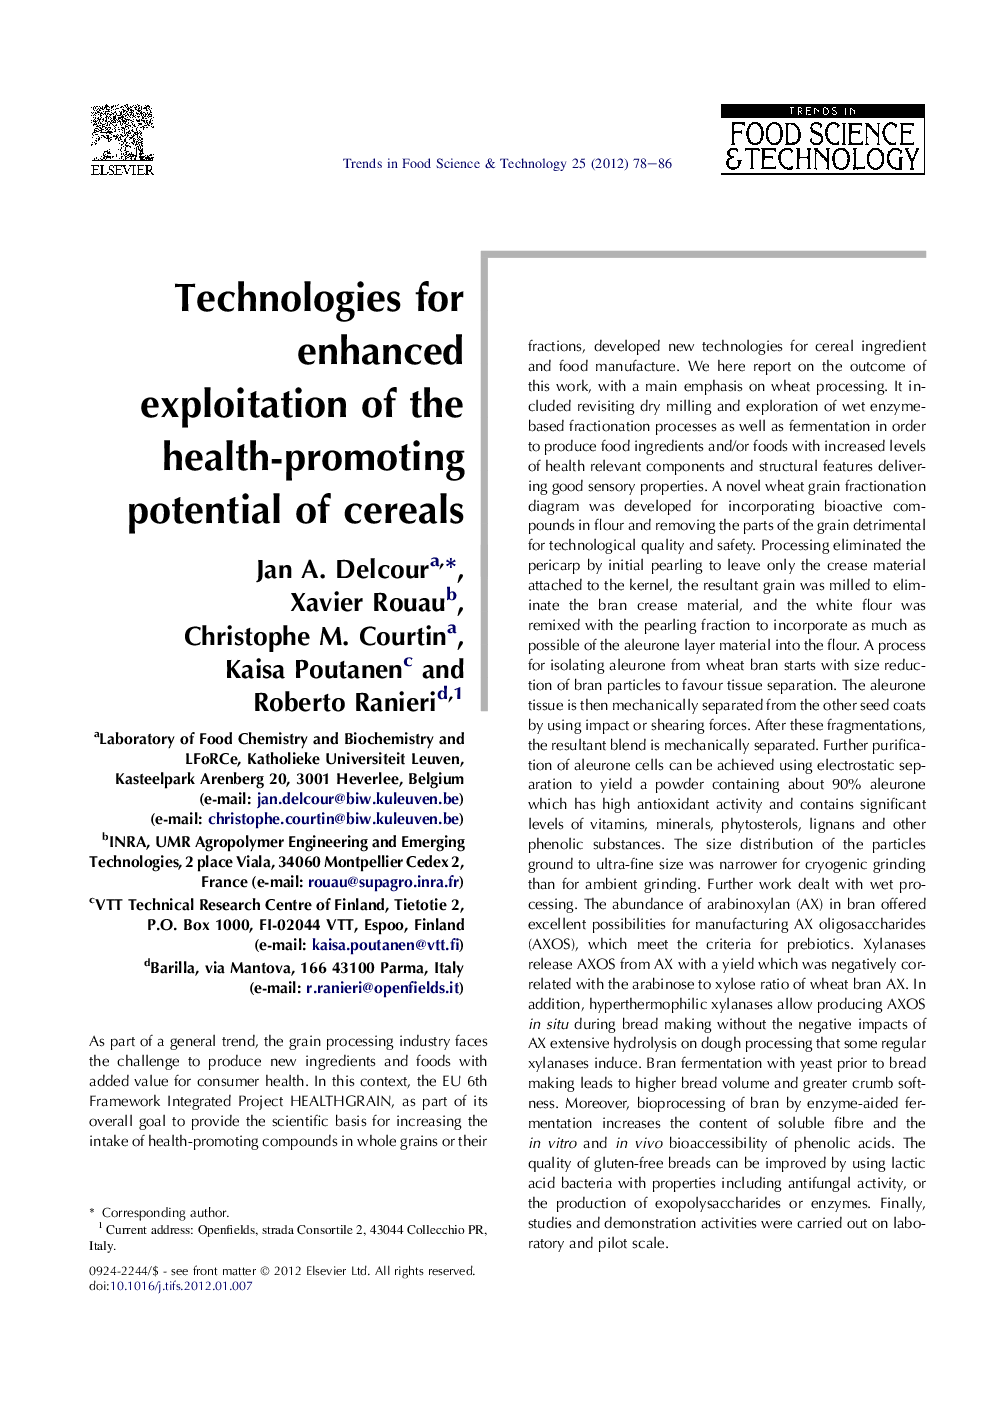 Technologies for enhanced exploitation of the health-promoting potential of cereals